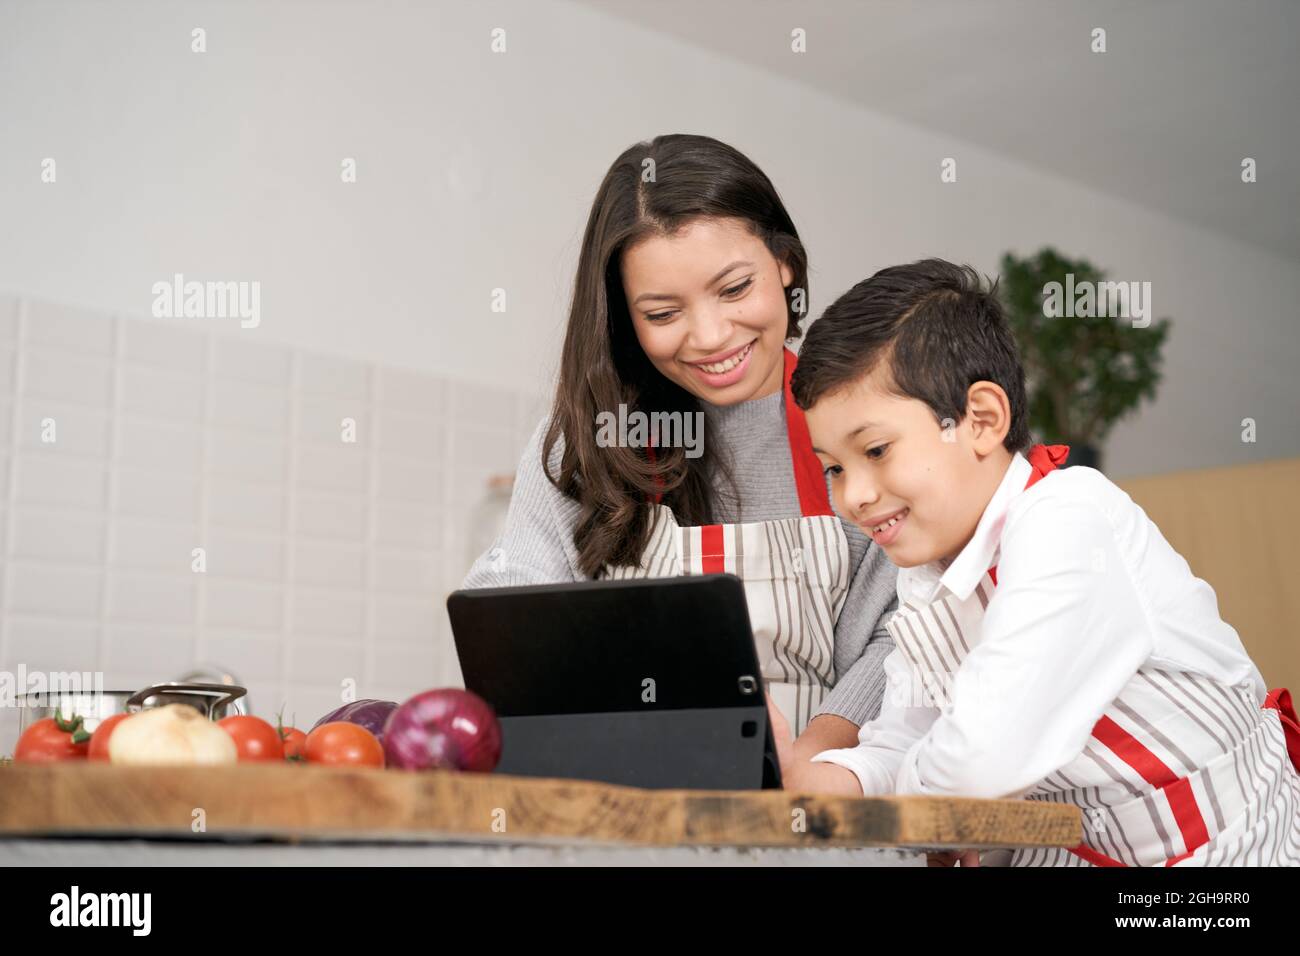 Mother and son search for healthy food recipes on the internet while cooking some vegetables in the kitchen. Lifestyle with latin people. Stock Photo